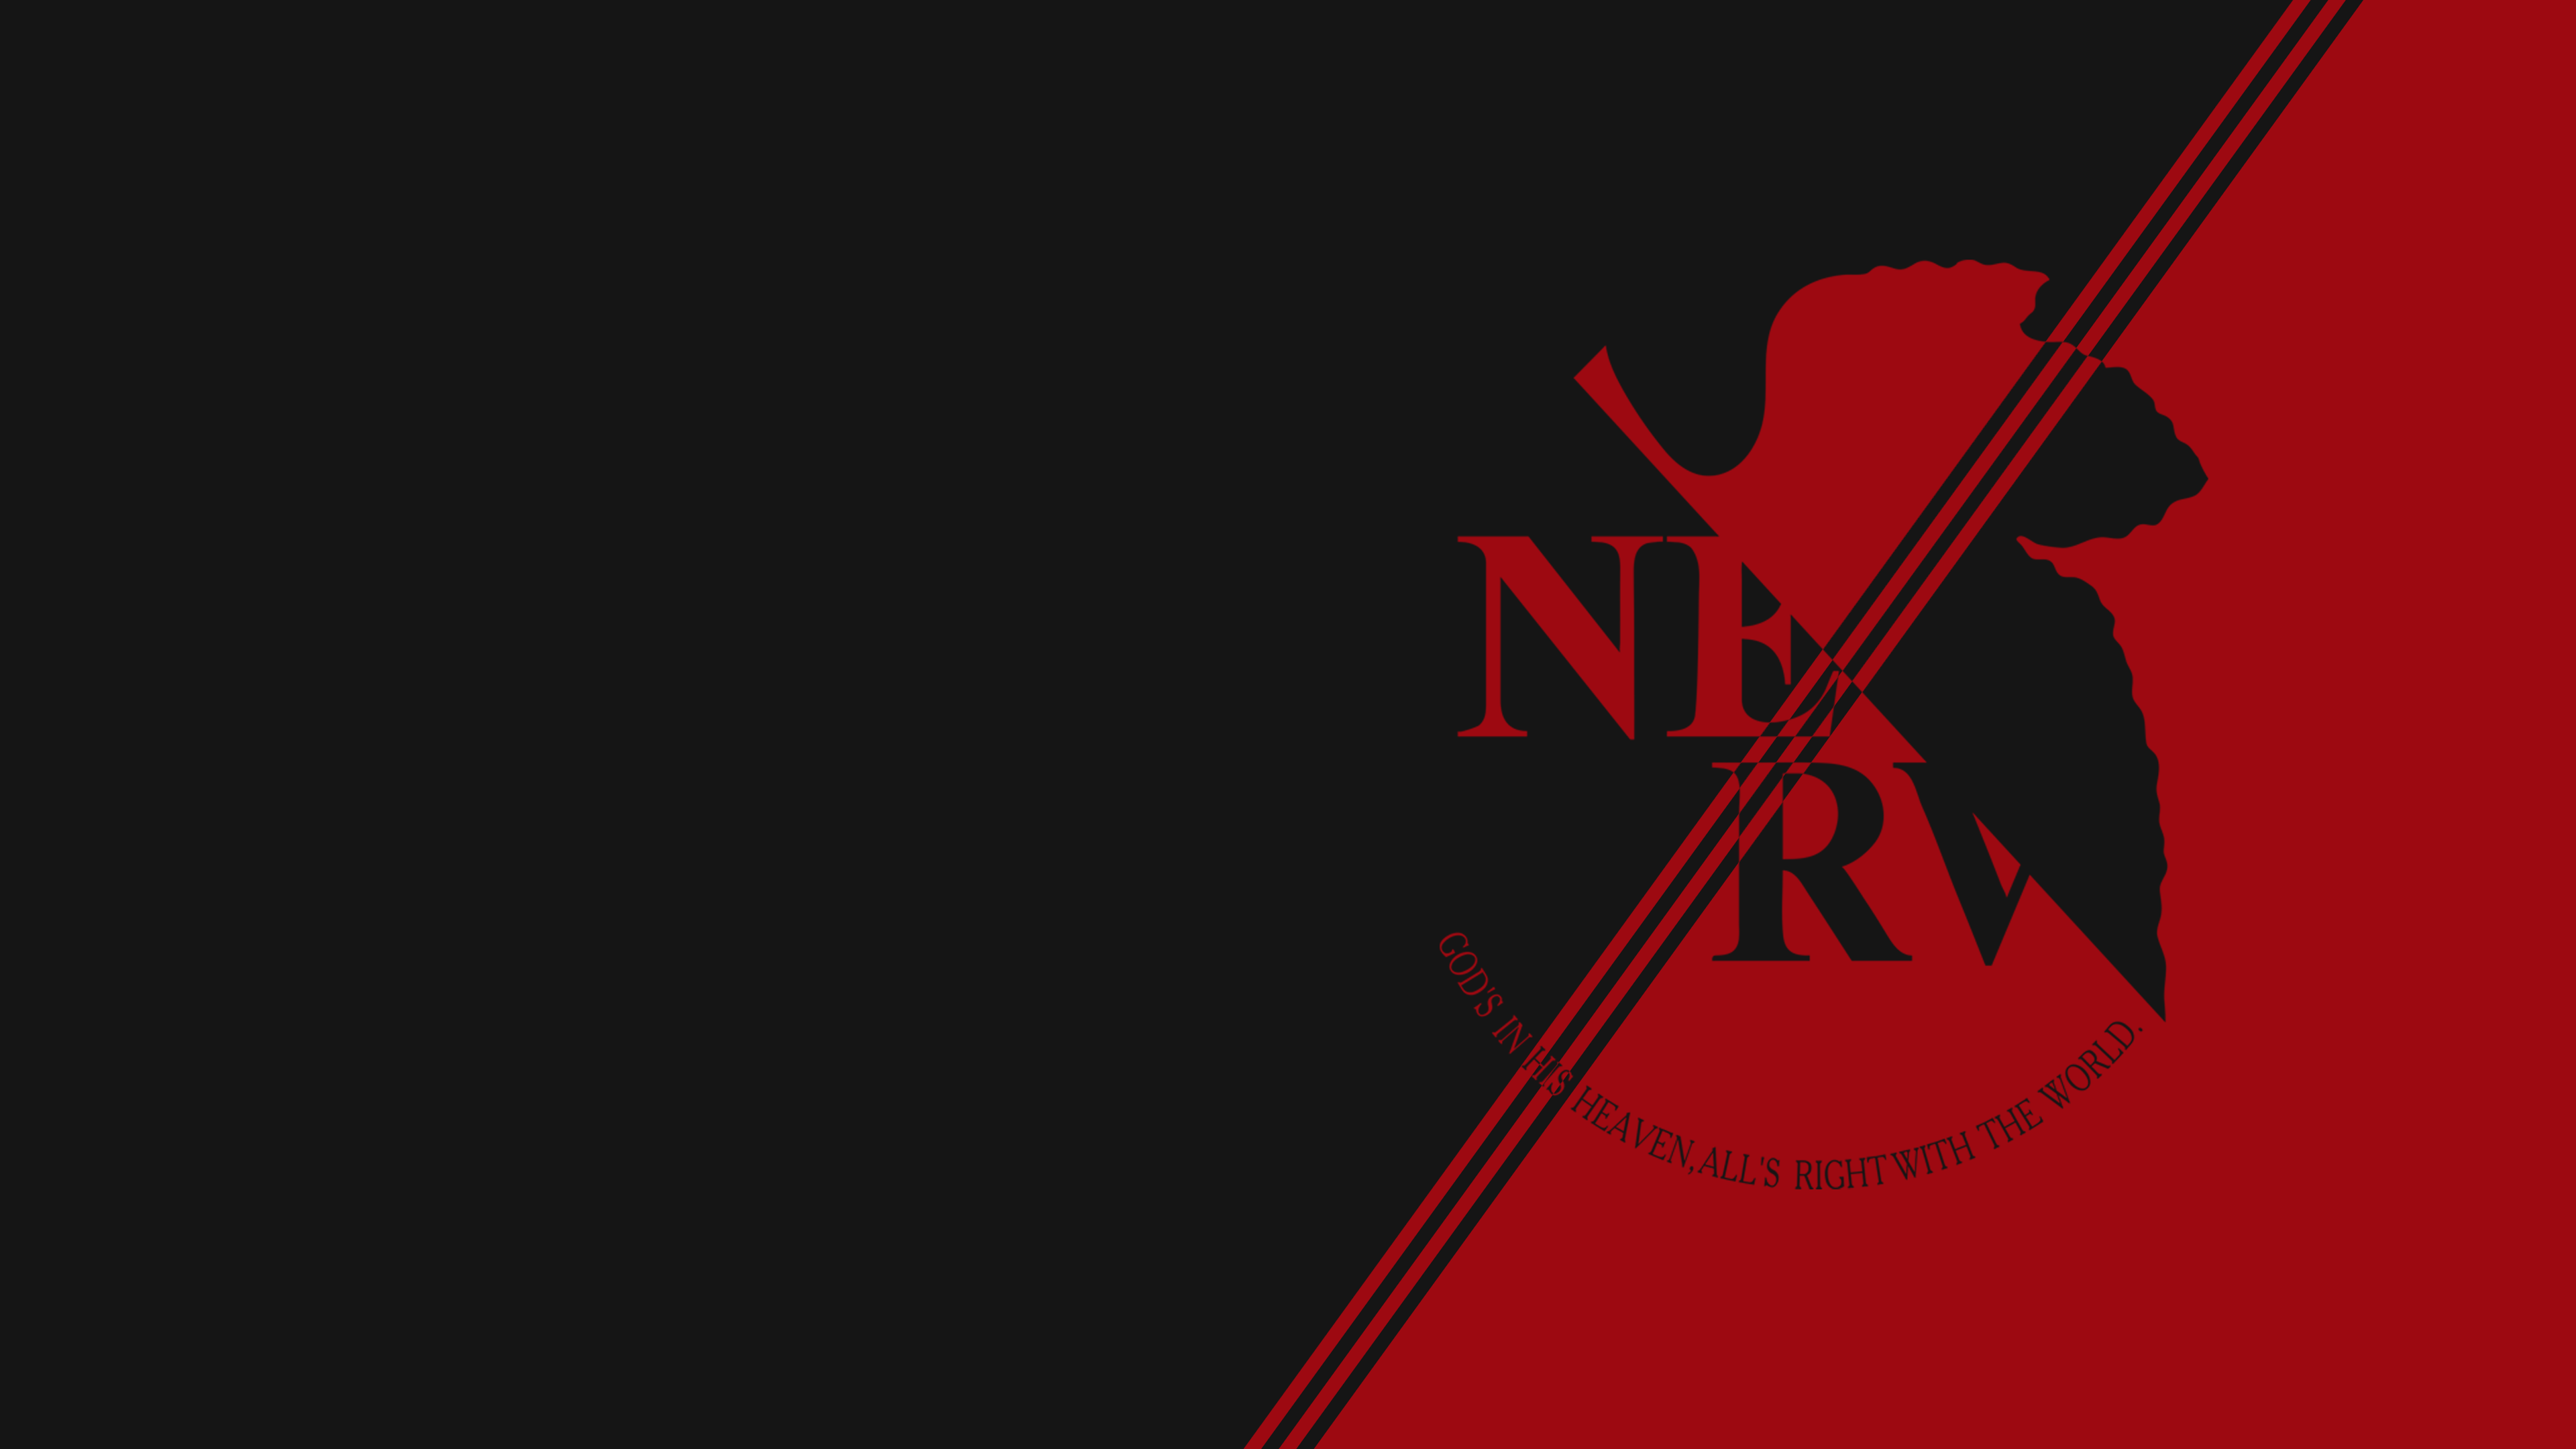 Nerv Wallpapers Top Free Nerv Backgrounds Wallpaperaccess